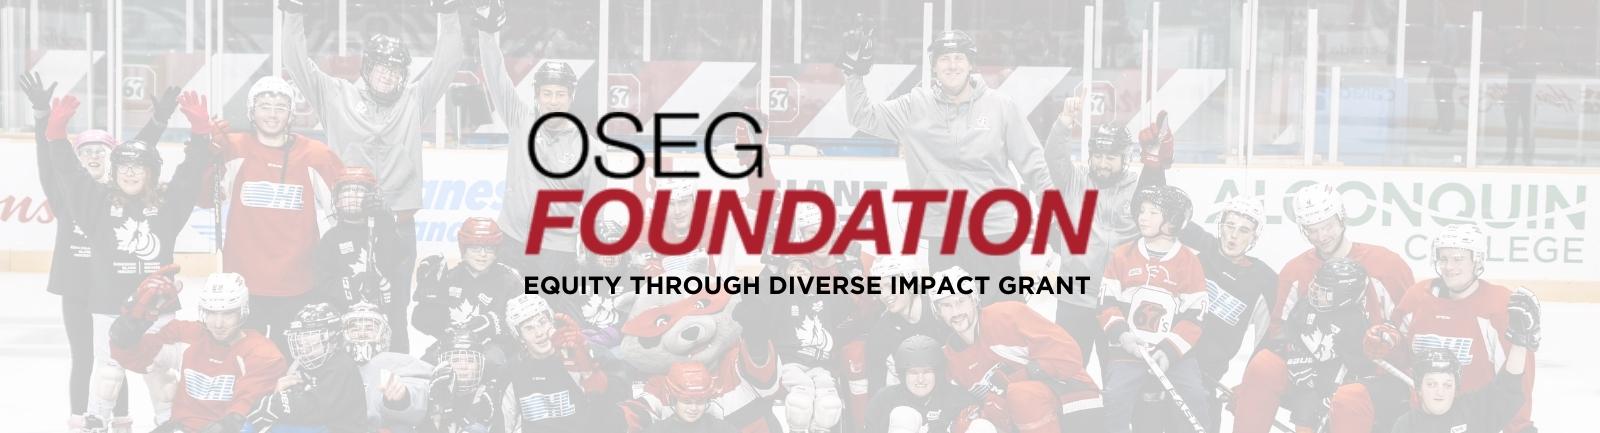 OSEG Foundation Equity Through Diverse Impact Grant banner